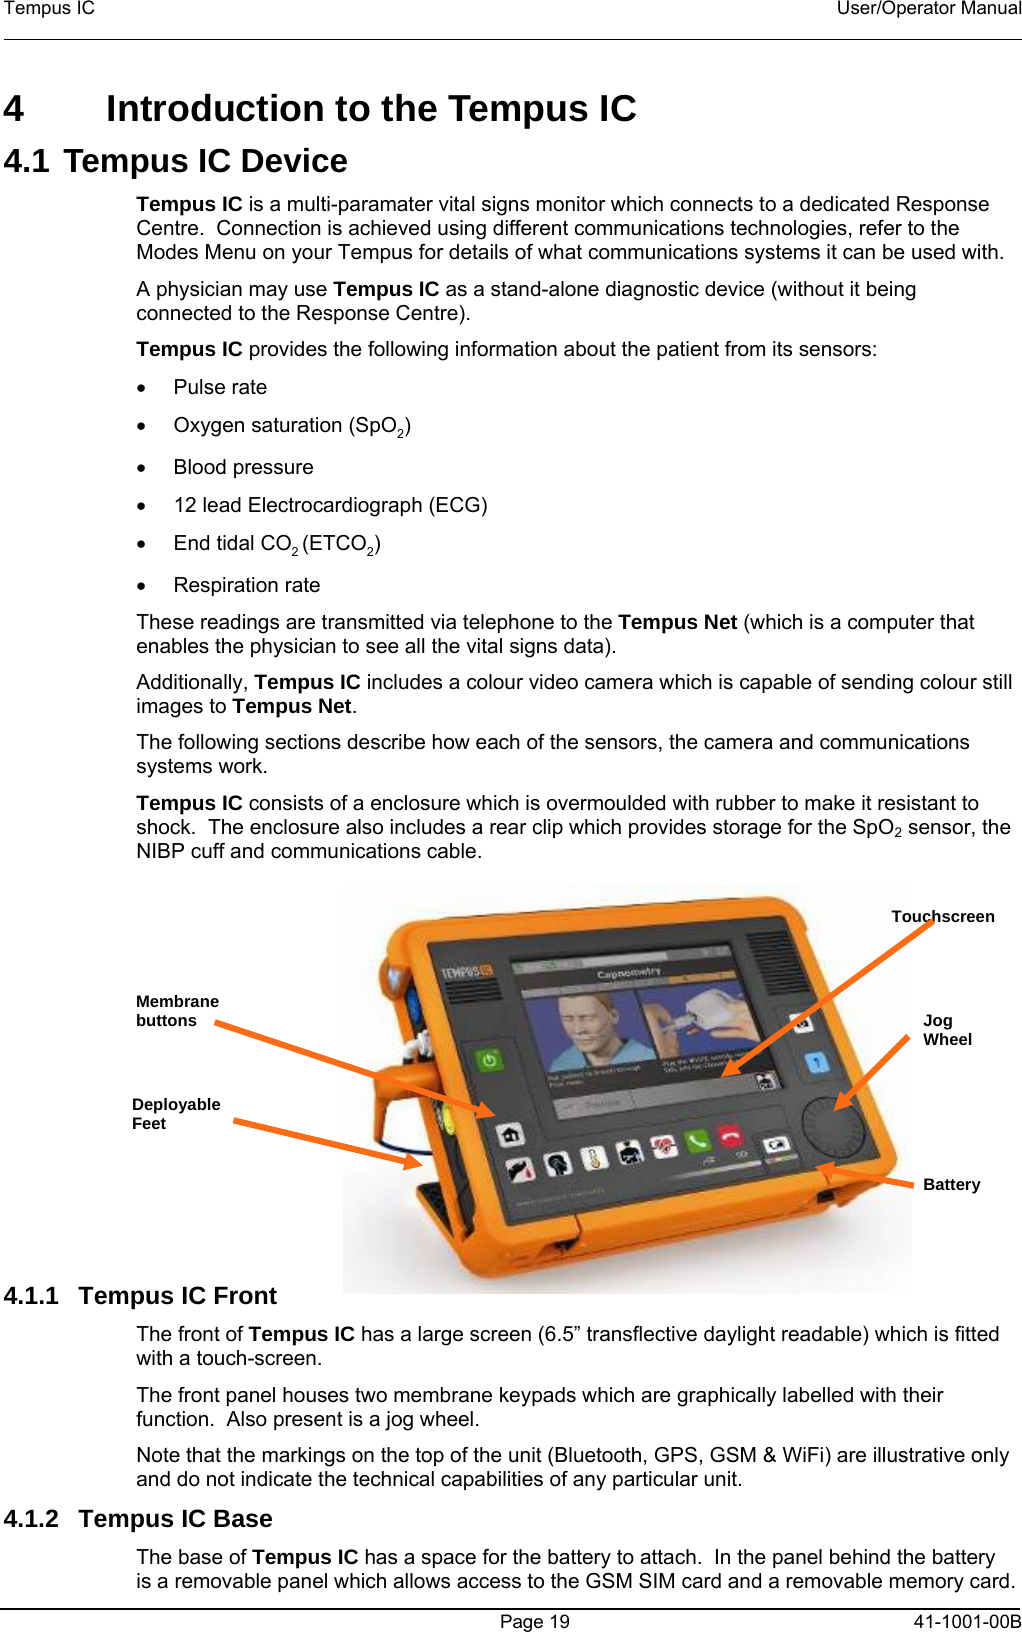 Tempus IC    User/Operator Manual    4  Introduction to the Tempus IC 4.1 Tempus IC Device Tempus IC is a multi-paramater vital signs monitor which connects to a dedicated Response Centre.  Connection is achieved using different communications technologies, refer to the Modes Menu on your Tempus for details of what communications systems it can be used with.  A physician may use Tempus IC as a stand-alone diagnostic device (without it being connected to the Response Centre).   Tempus IC provides the following information about the patient from its sensors: • Pulse rate •  Oxygen saturation (SpO2)  • Blood pressure •  12 lead Electrocardiograph (ECG) •  End tidal CO2 (ETCO2) • Respiration rate These readings are transmitted via telephone to the Tempus Net (which is a computer that enables the physician to see all the vital signs data).   Additionally, Tempus IC includes a colour video camera which is capable of sending colour still images to Tempus Net. The following sections describe how each of the sensors, the camera and communications systems work.   Tempus IC consists of a enclosure which is overmoulded with rubber to make it resistant to shock.  The enclosure also includes a rear clip which provides storage for the SpO2 sensor, the NIBP cuff and communications cable.         The   Page 19   41-1001-00B Tempus IC   4.1.1  Tempus IC Front  The front of Tempus IC has a large screen (6.5” transflective daylight readable) which is fitted with a touch-screen.   The front panel houses two membrane keypads which are graphically labelled with their function.  Also present is a jog wheel. Note that the markings on the top of the unit (Bluetooth, GPS, GSM &amp; WiFi) are illustrative only and do not indicate the technical capabilities of any particular unit. Deployable Feet Membrane buttons  Jog Wheel Touchscreen Battery 4.1.2  Tempus IC Base The base of Tempus IC has a space for the battery to attach.  In the panel behind the battery is a removable panel which allows access to the GSM SIM card and a removable memory card.   